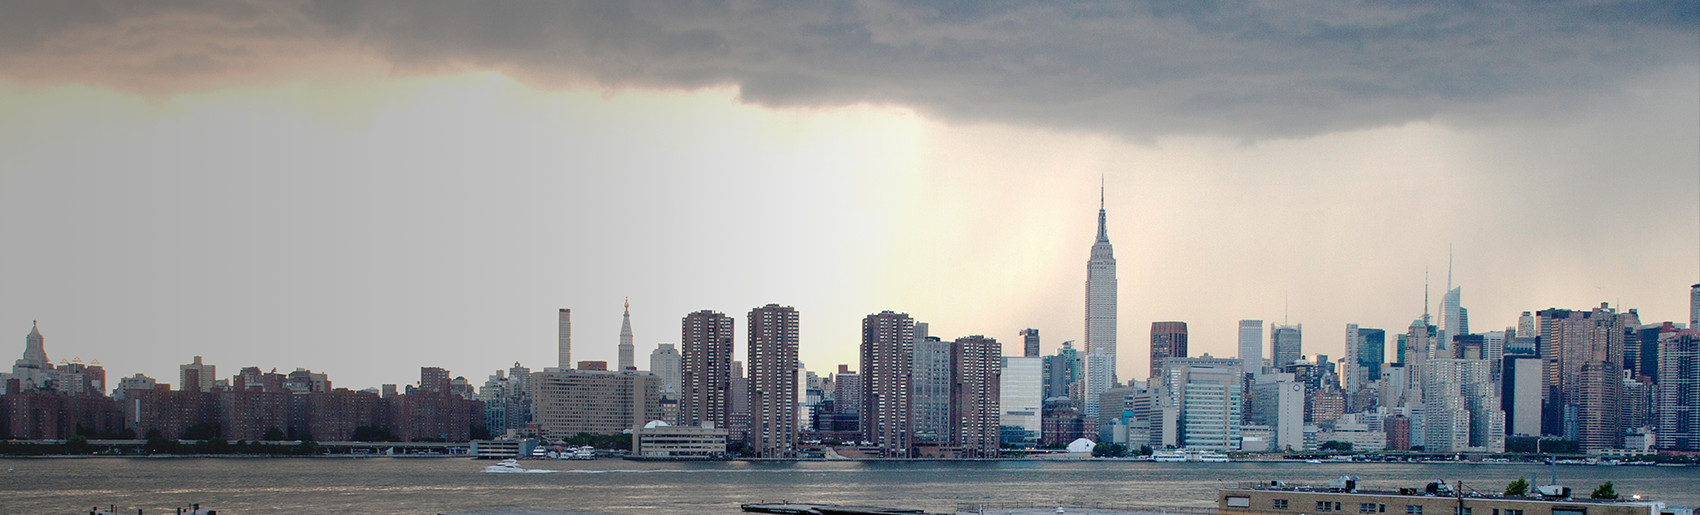 A view of the New York City skyline.